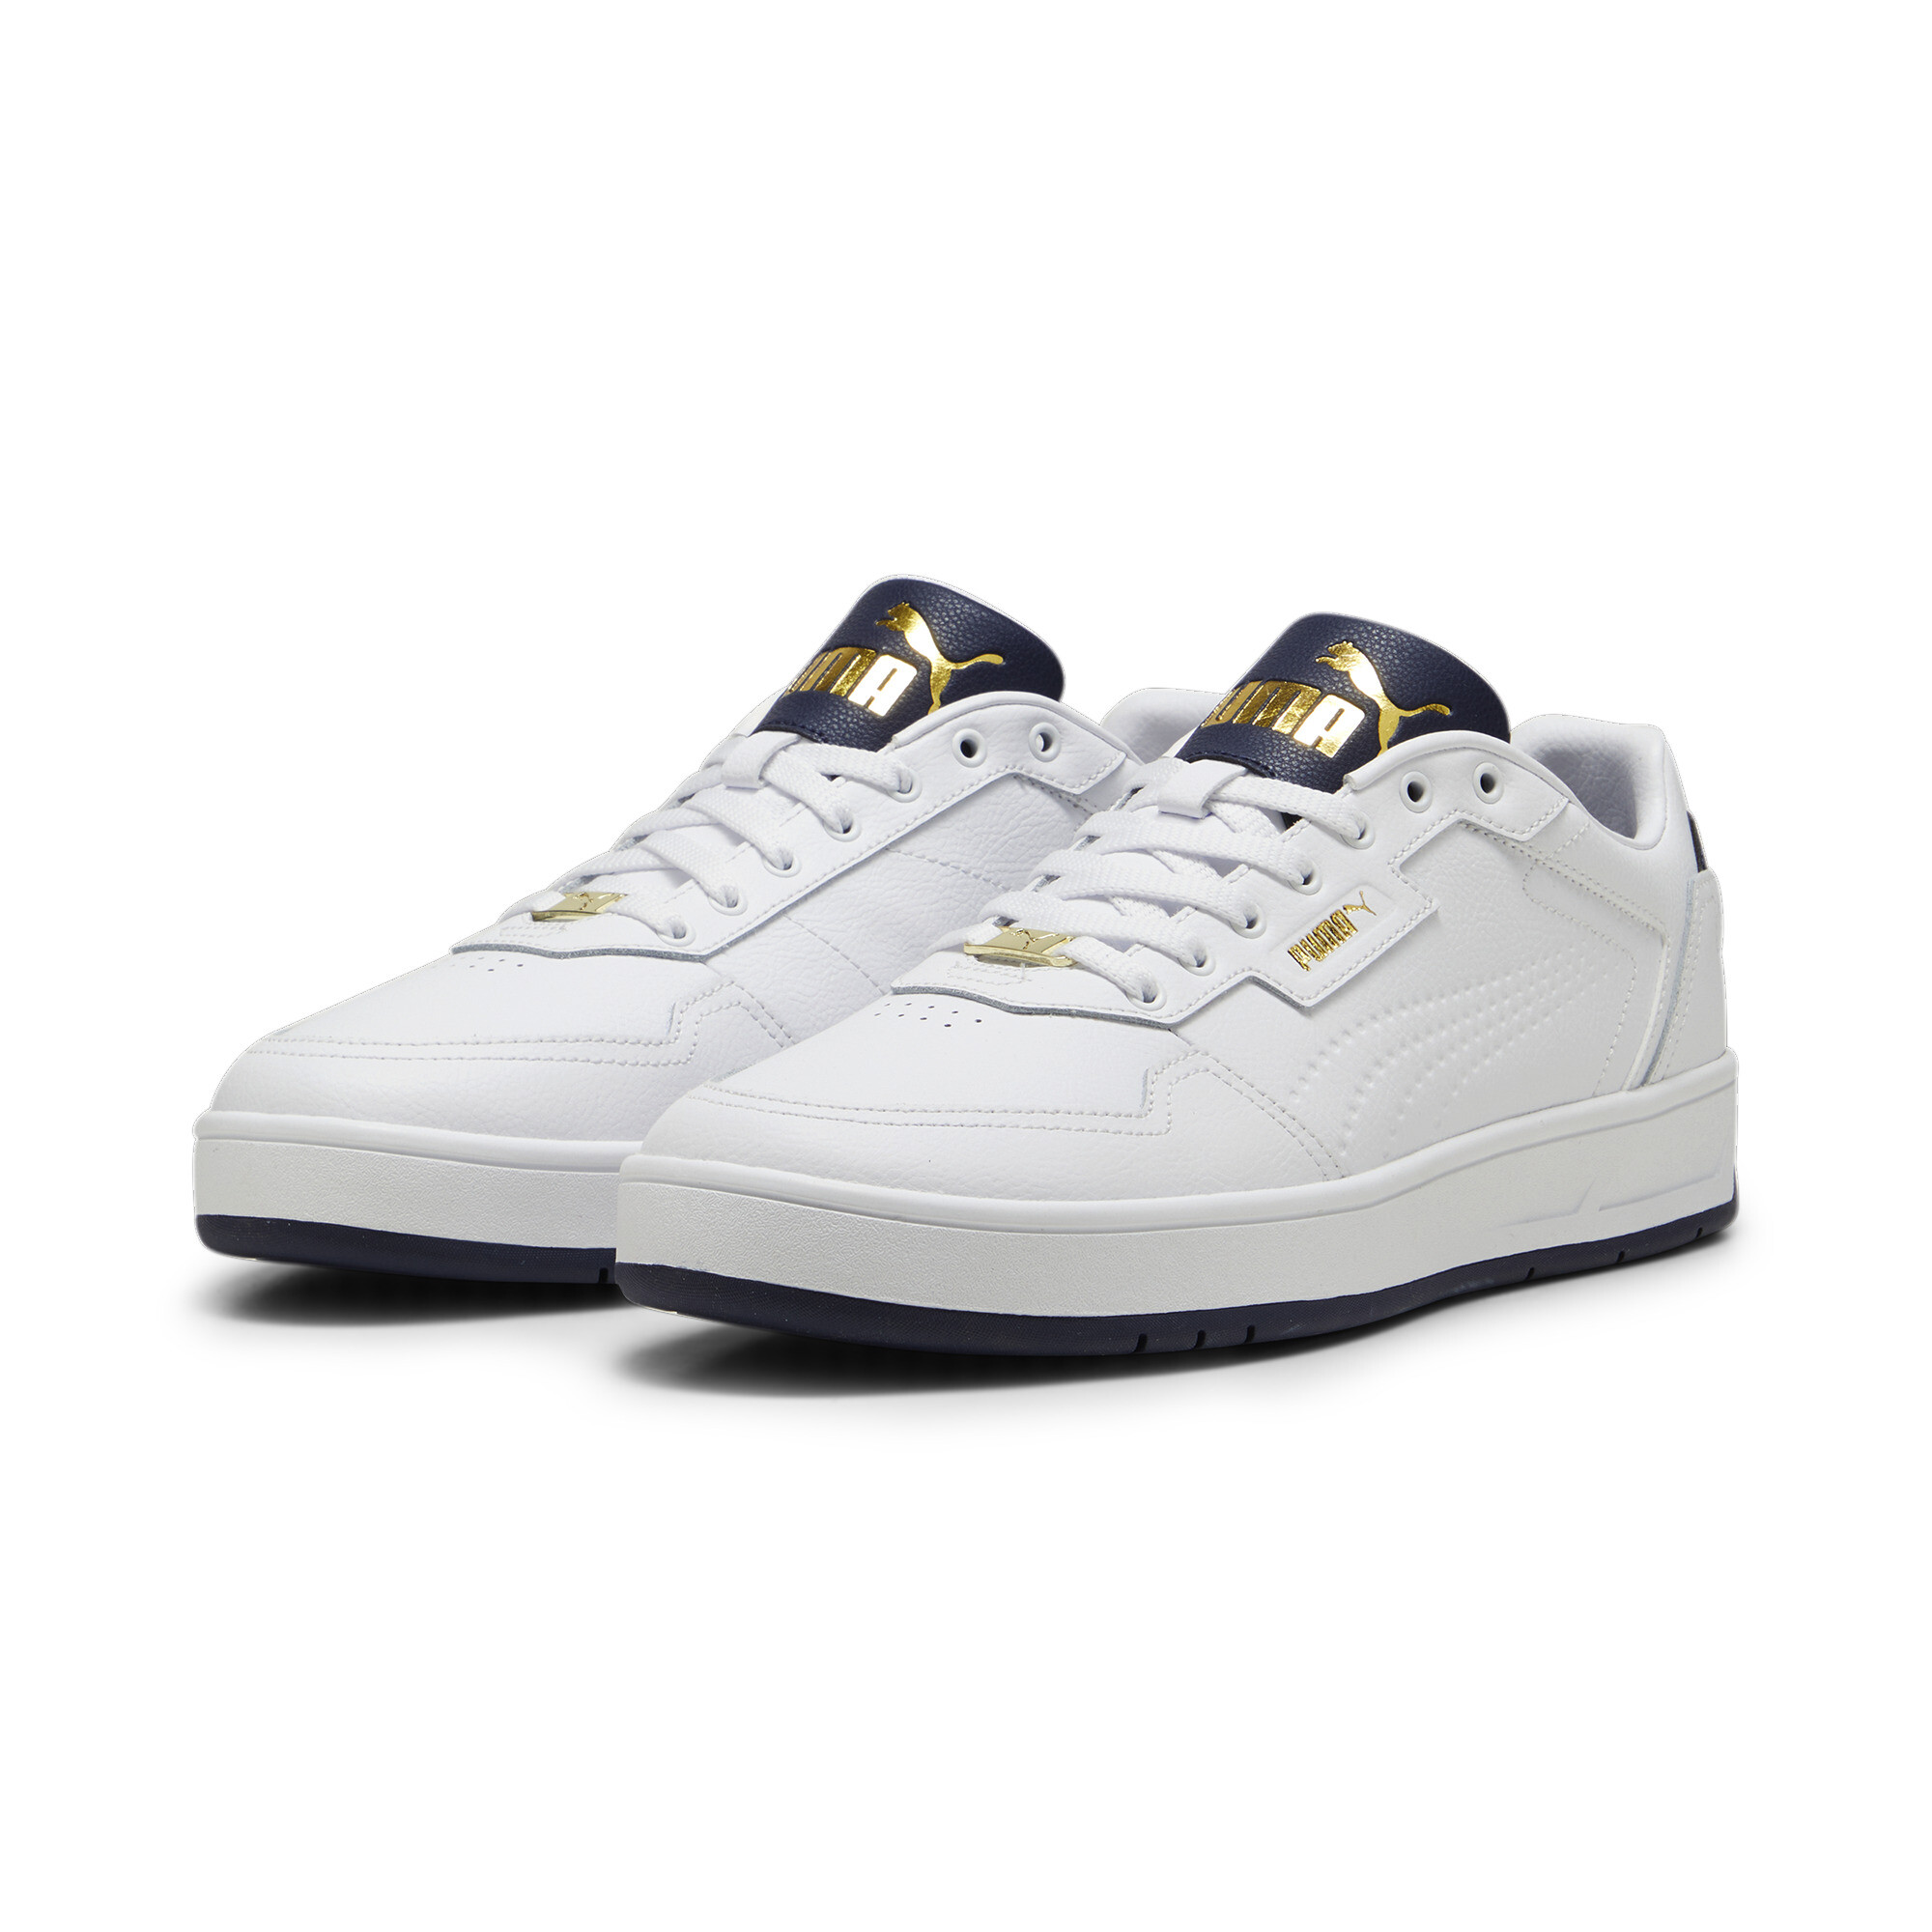 Puma Court Classic Lux Sneakers, White, Size 42, Shoes